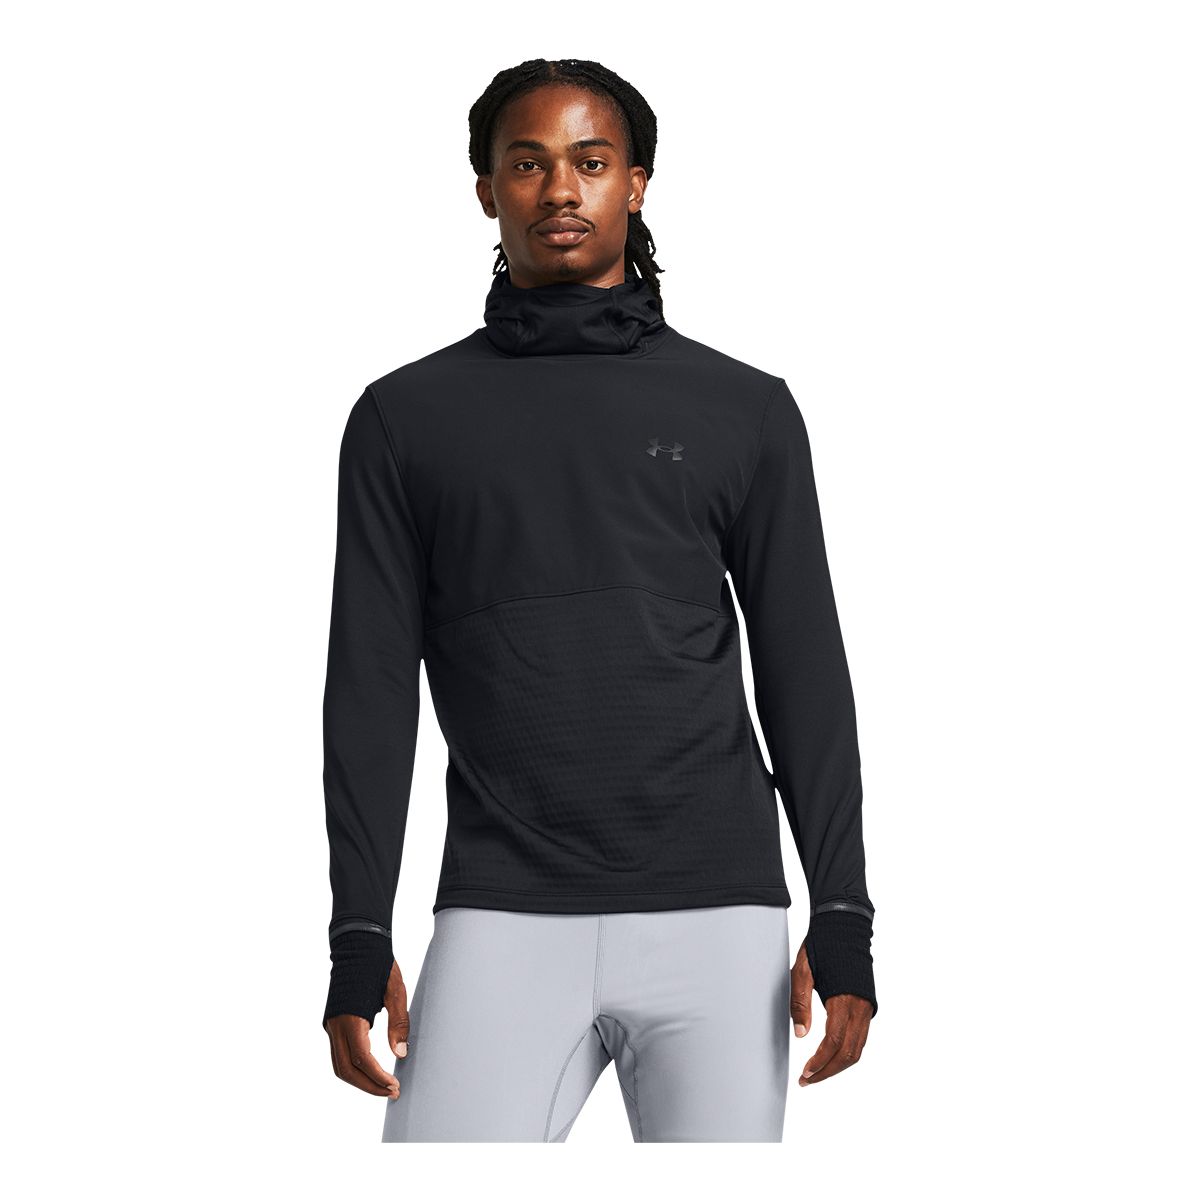 Image of Under Armour Men's Qualifier Cold Hoodie